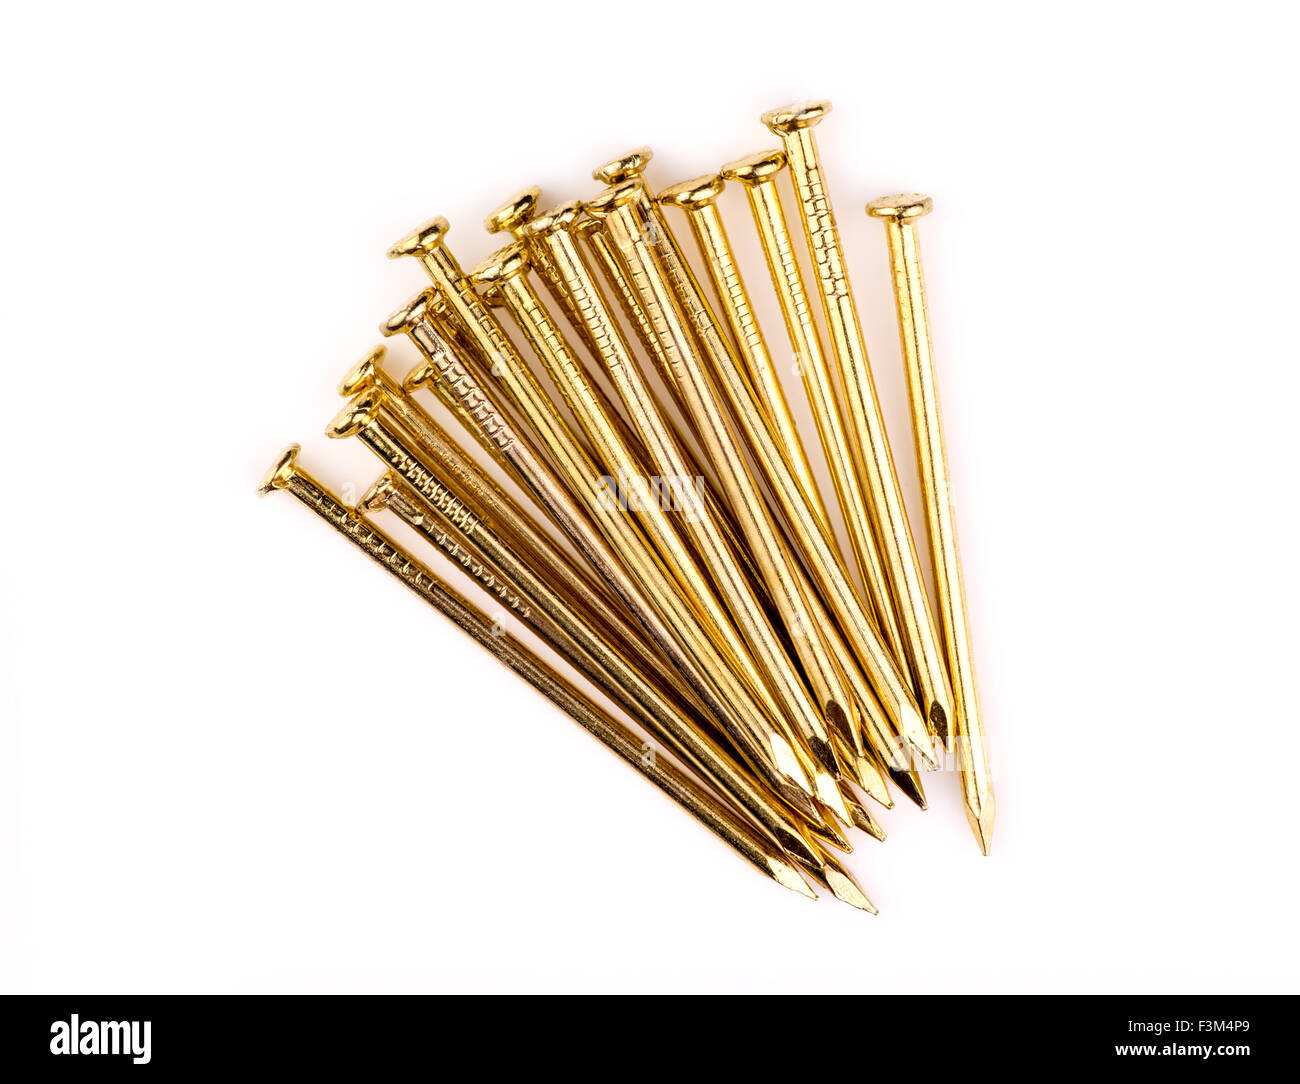 Pile of sharp brass nails Stock Photo